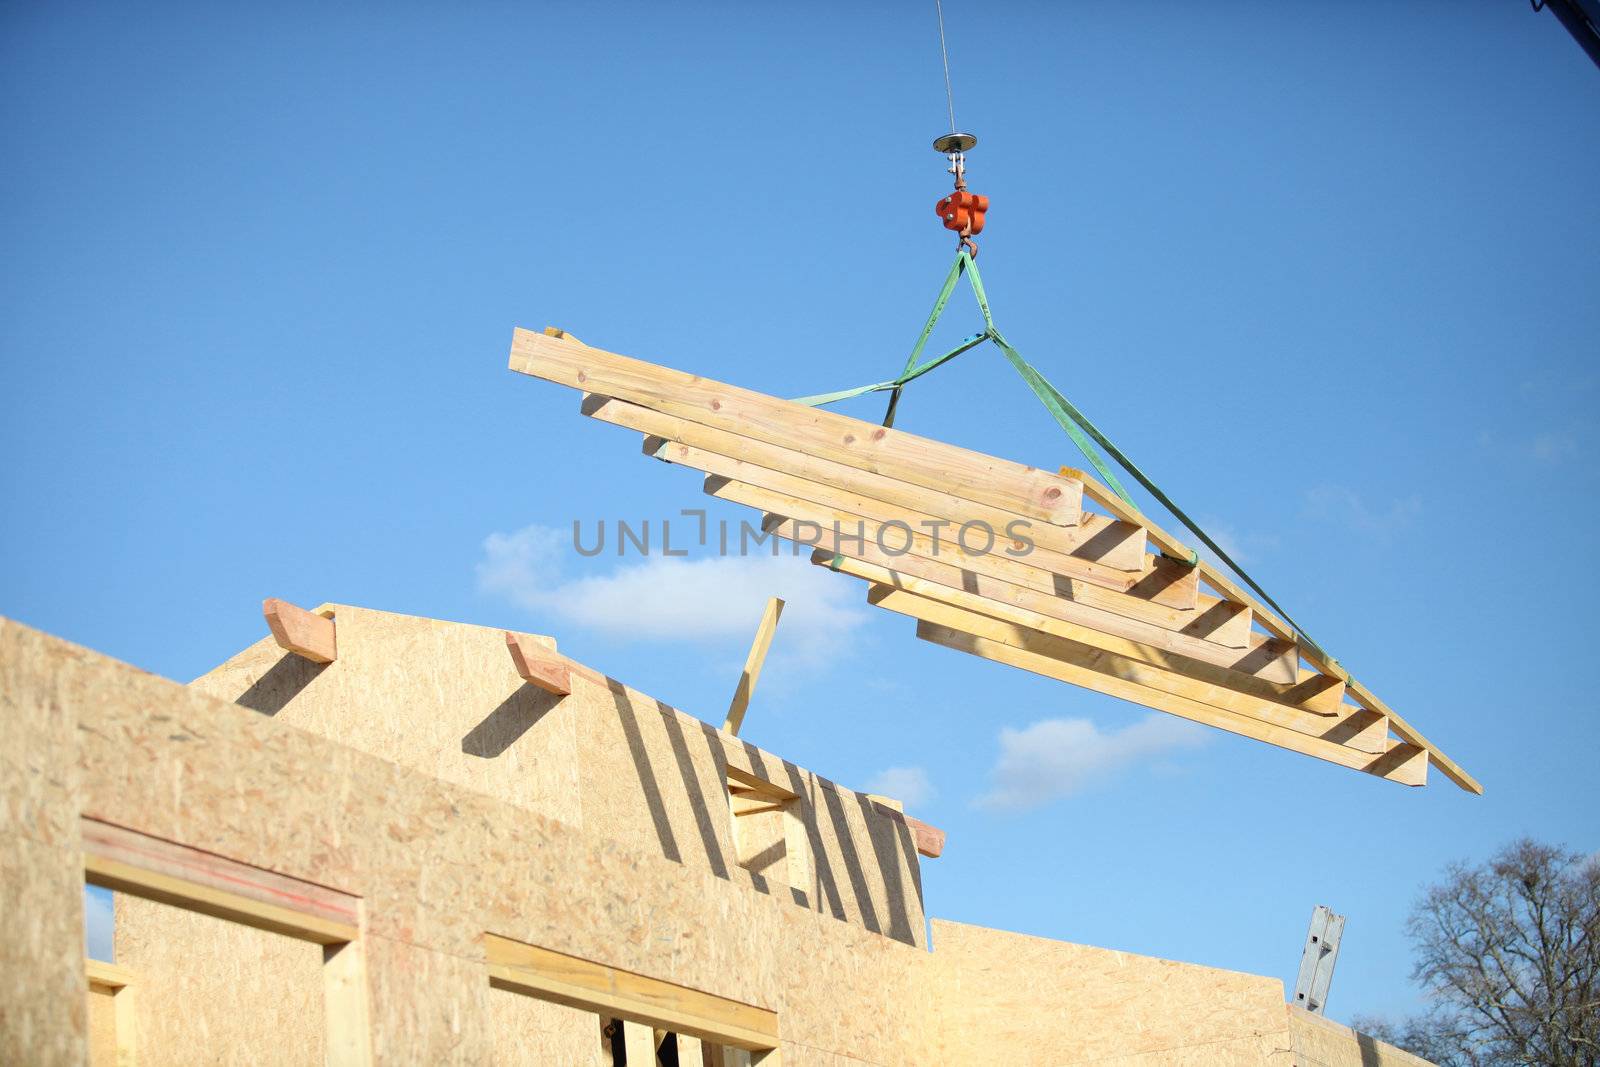 Crane lifting building materials by phovoir